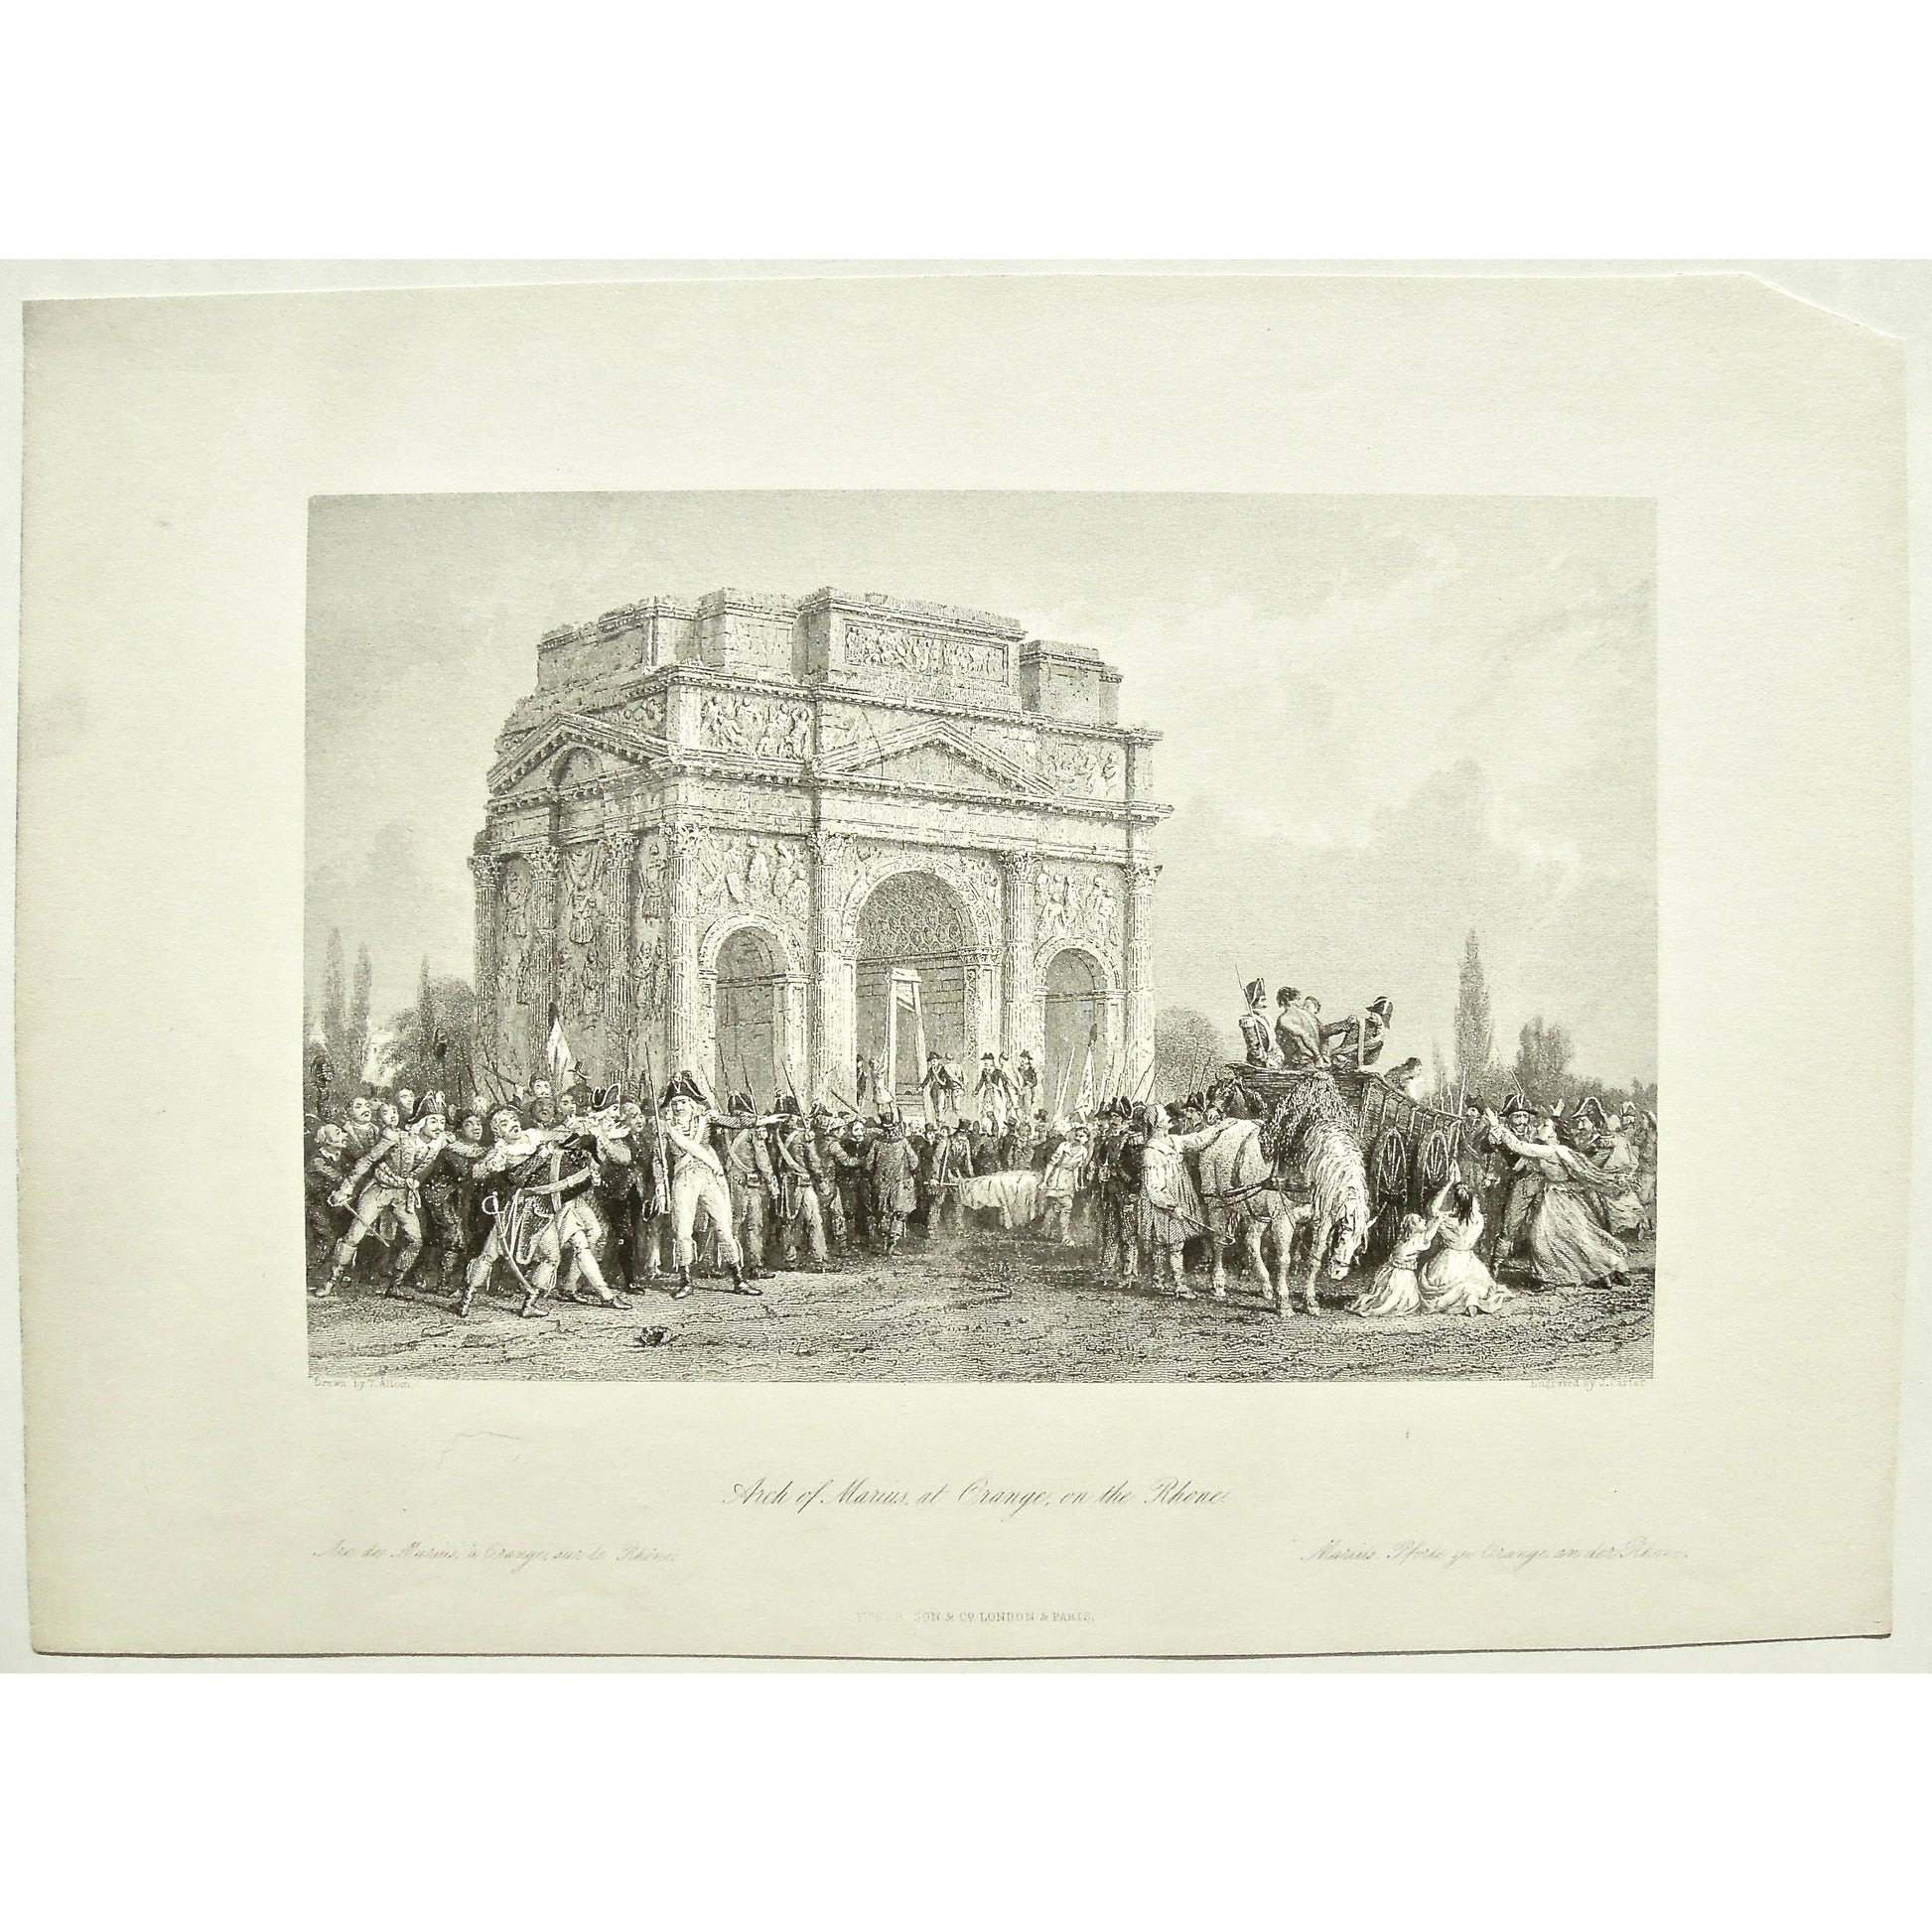 France, France Illustrated, Arch, Arch of Marius, Arch of Marius on the Rhone, Rhone, Marius, Arc, Arc de Marius, Rhône, Marius Psorte, Bogen, Arches, Public Execution, Execution, Executions, Public Hanging, Hangings, Guillotine, Guillotines, French, French Revolution, Crowds of people, soldiers, Horse and carriage, Prisoner, Prisoners, Stretcher, Pleading, Triumphal Arch of Orange, Corinthian, Corinthian Architecture, Revolution, Revolutionaries, French Soldiers, Army, Army attire, Antique Prints, Vintage